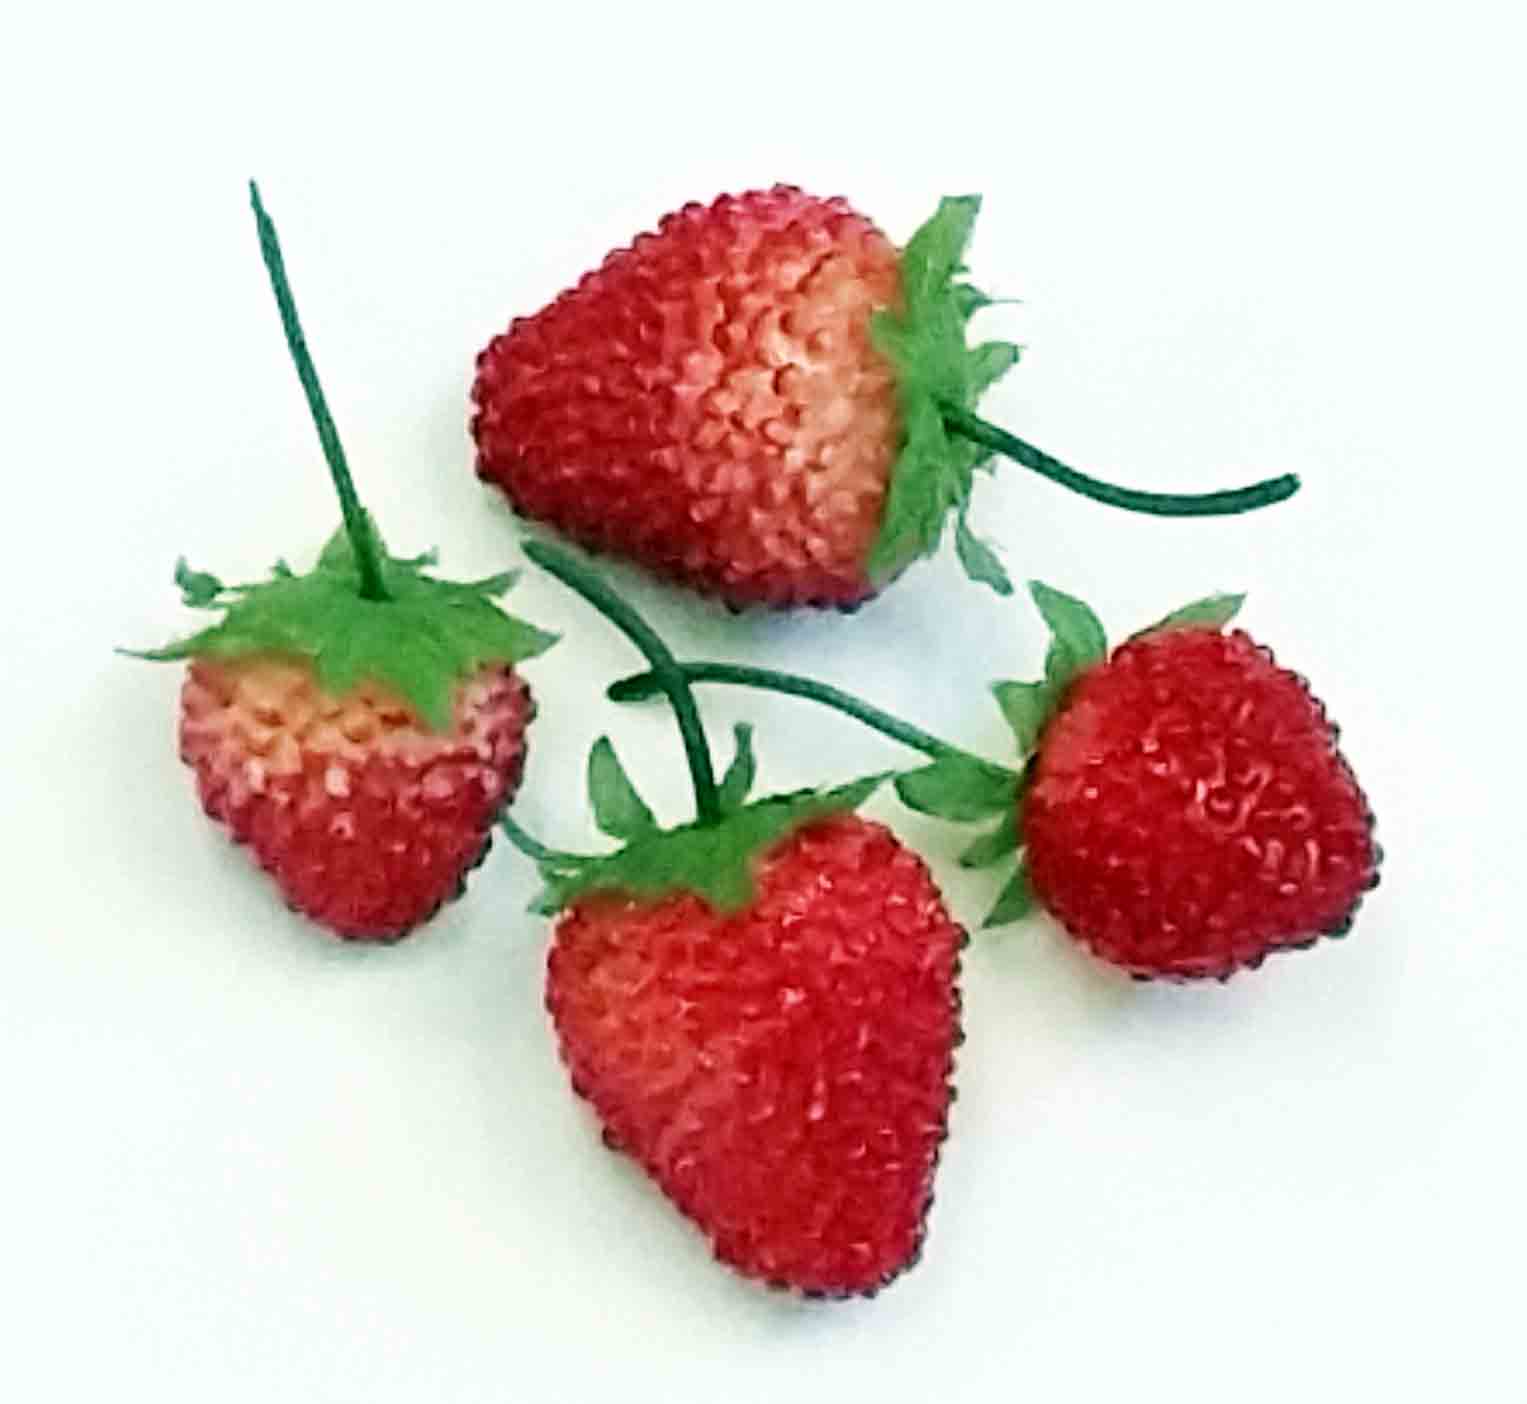 6405 - 1" to 1.5" Strawberries - 4.95 bag of 12